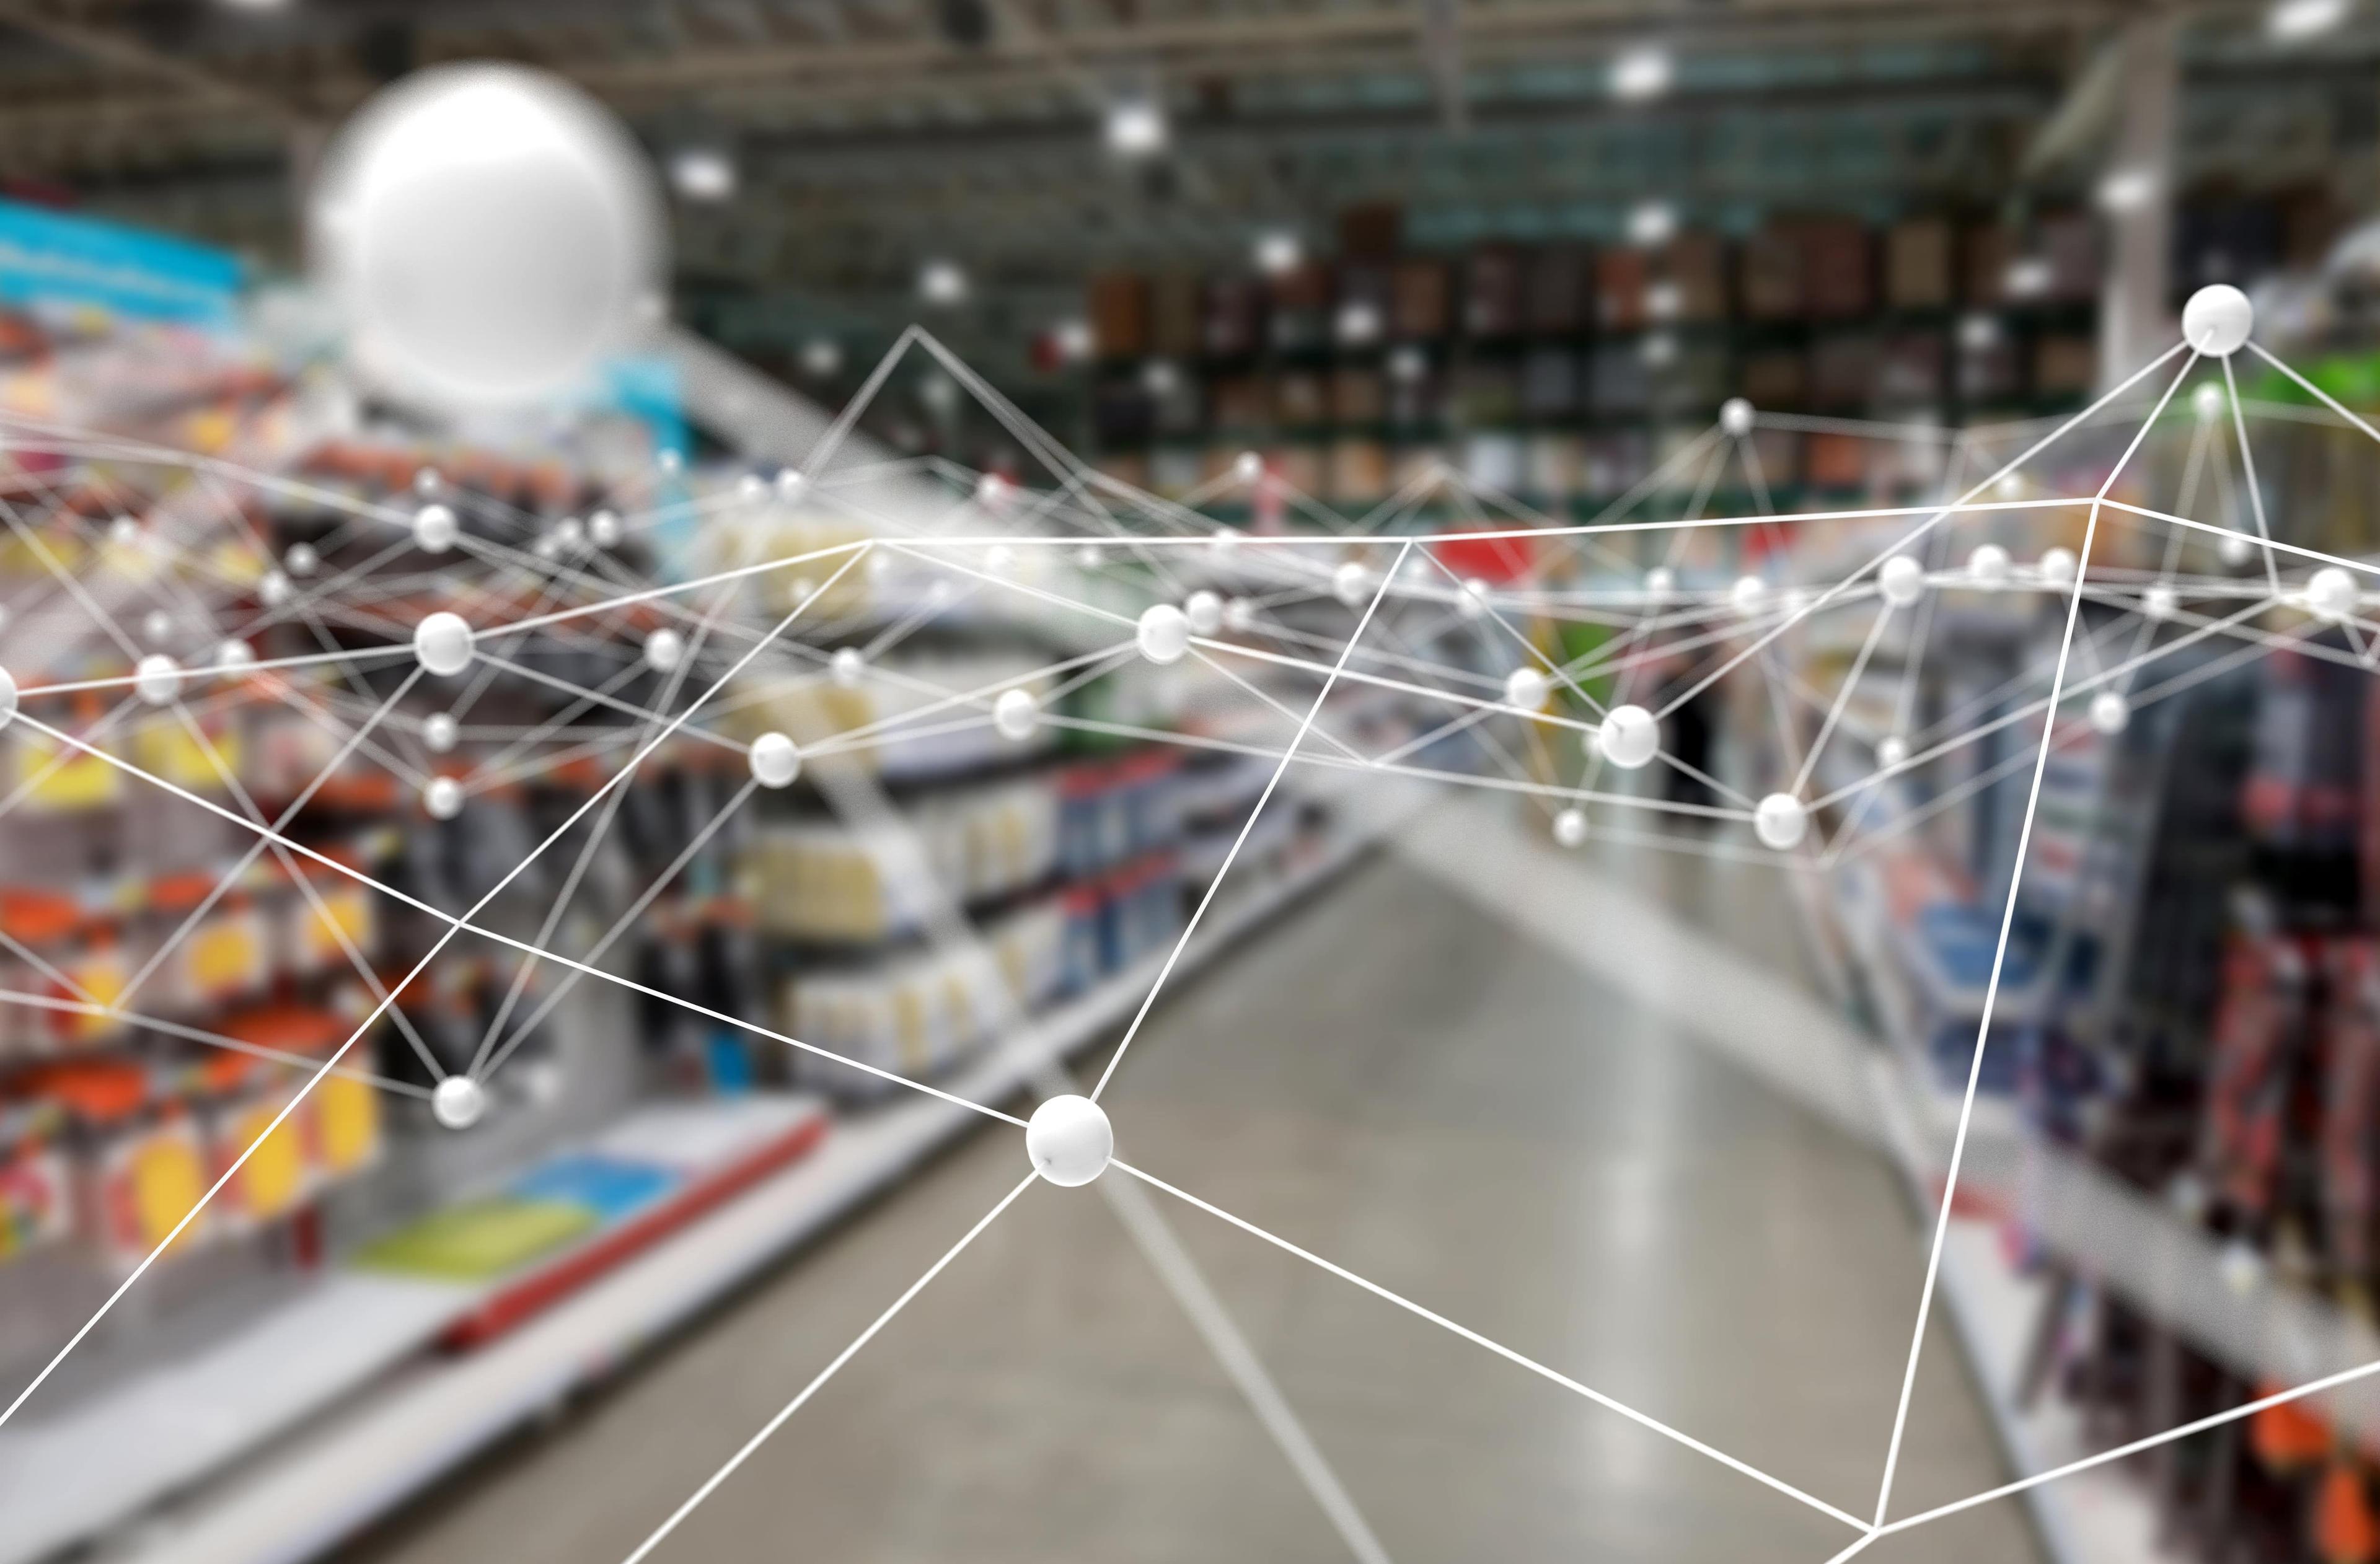 AI depicted through lines and dots in retail store